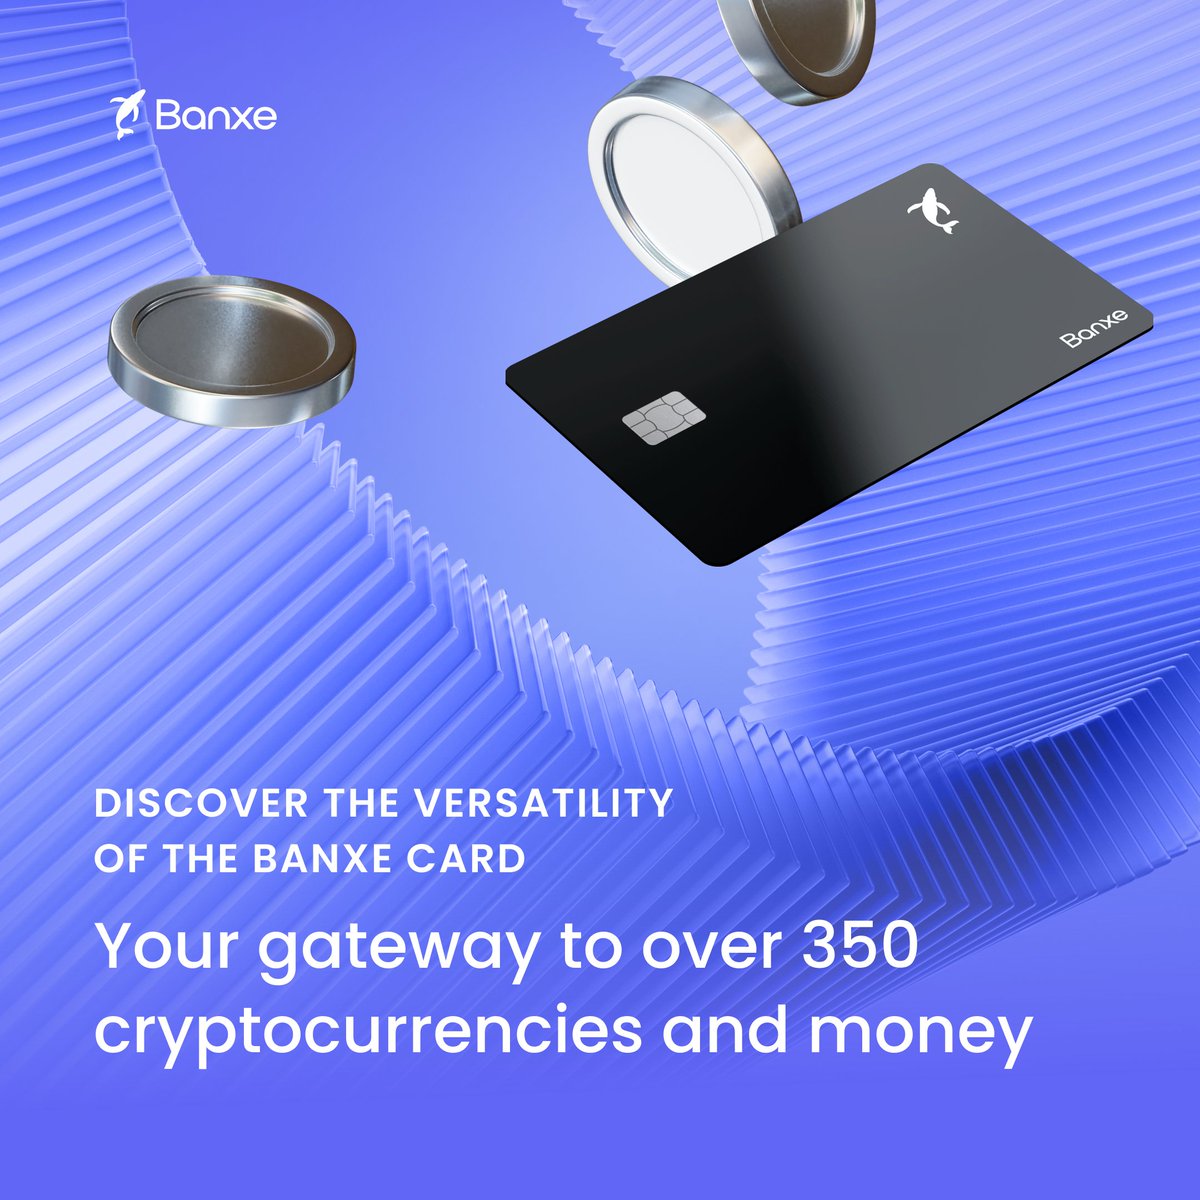 Unlock the power of the Banxe Card! Seamlessly shop with over 350 cryptocurrencies or traditional money, from groceries to global travels. Top up anytime with EUR, GBP, USD, or crypto. Don't miss out, get yours today! #Banxe #BanxeCard #CryptoTopup #GlobalPayments